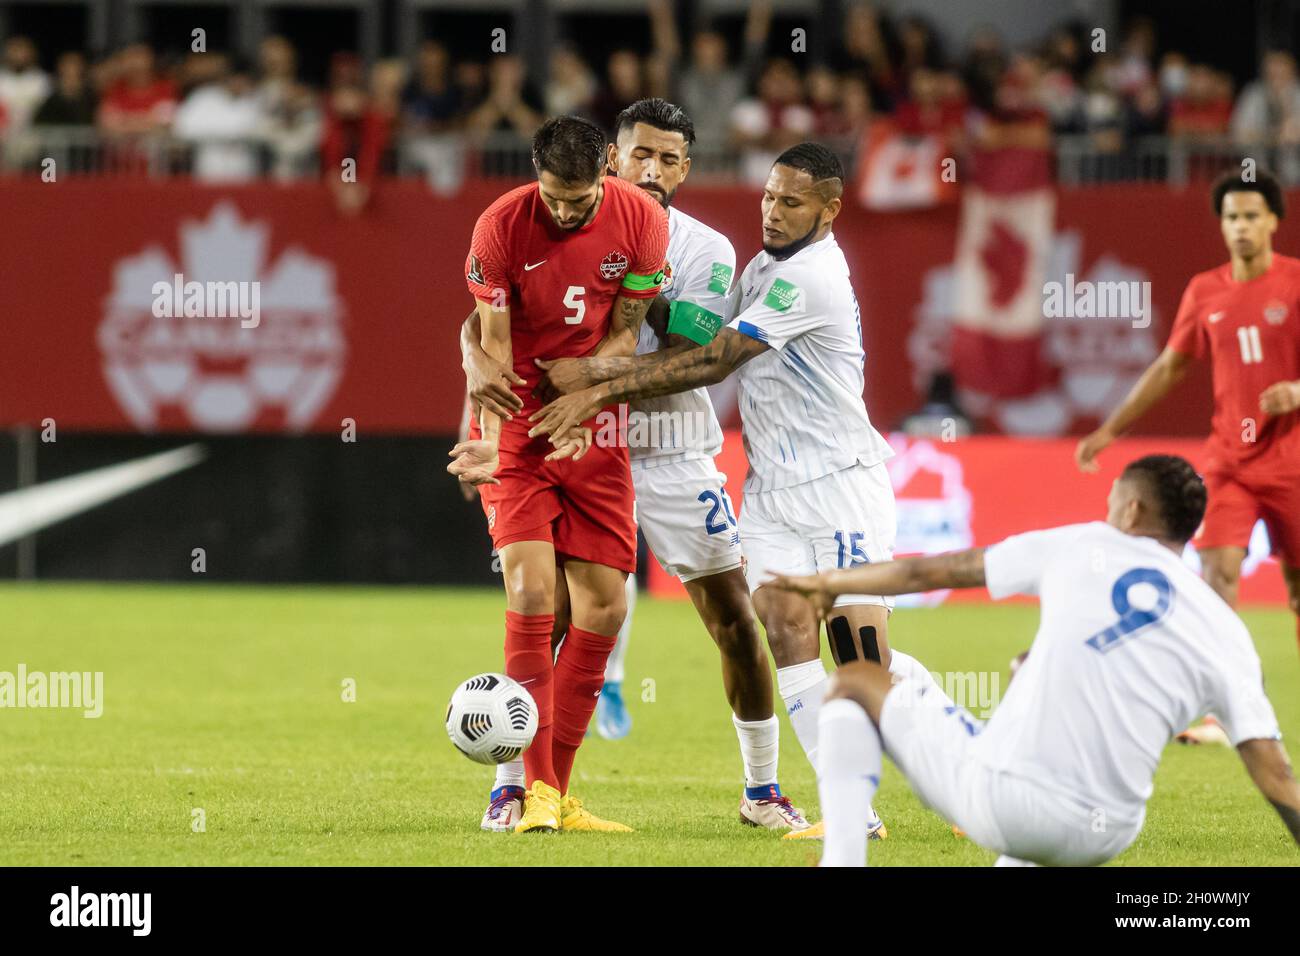 Toronto, Canada, October 13, 2021: Steven Vitória, No.5, of Team Canada is tackled by two Team Panama players, Aníbal Godoy, No.20, and Eric Davis, No.15, during the CONCACAF FIFA World Cup Qualifying 2022 match at BMO Field in Toronto, Canada. Canada won the match 4-1. Credit: Phamai Techaphan/Alamy Live News Stock Photo